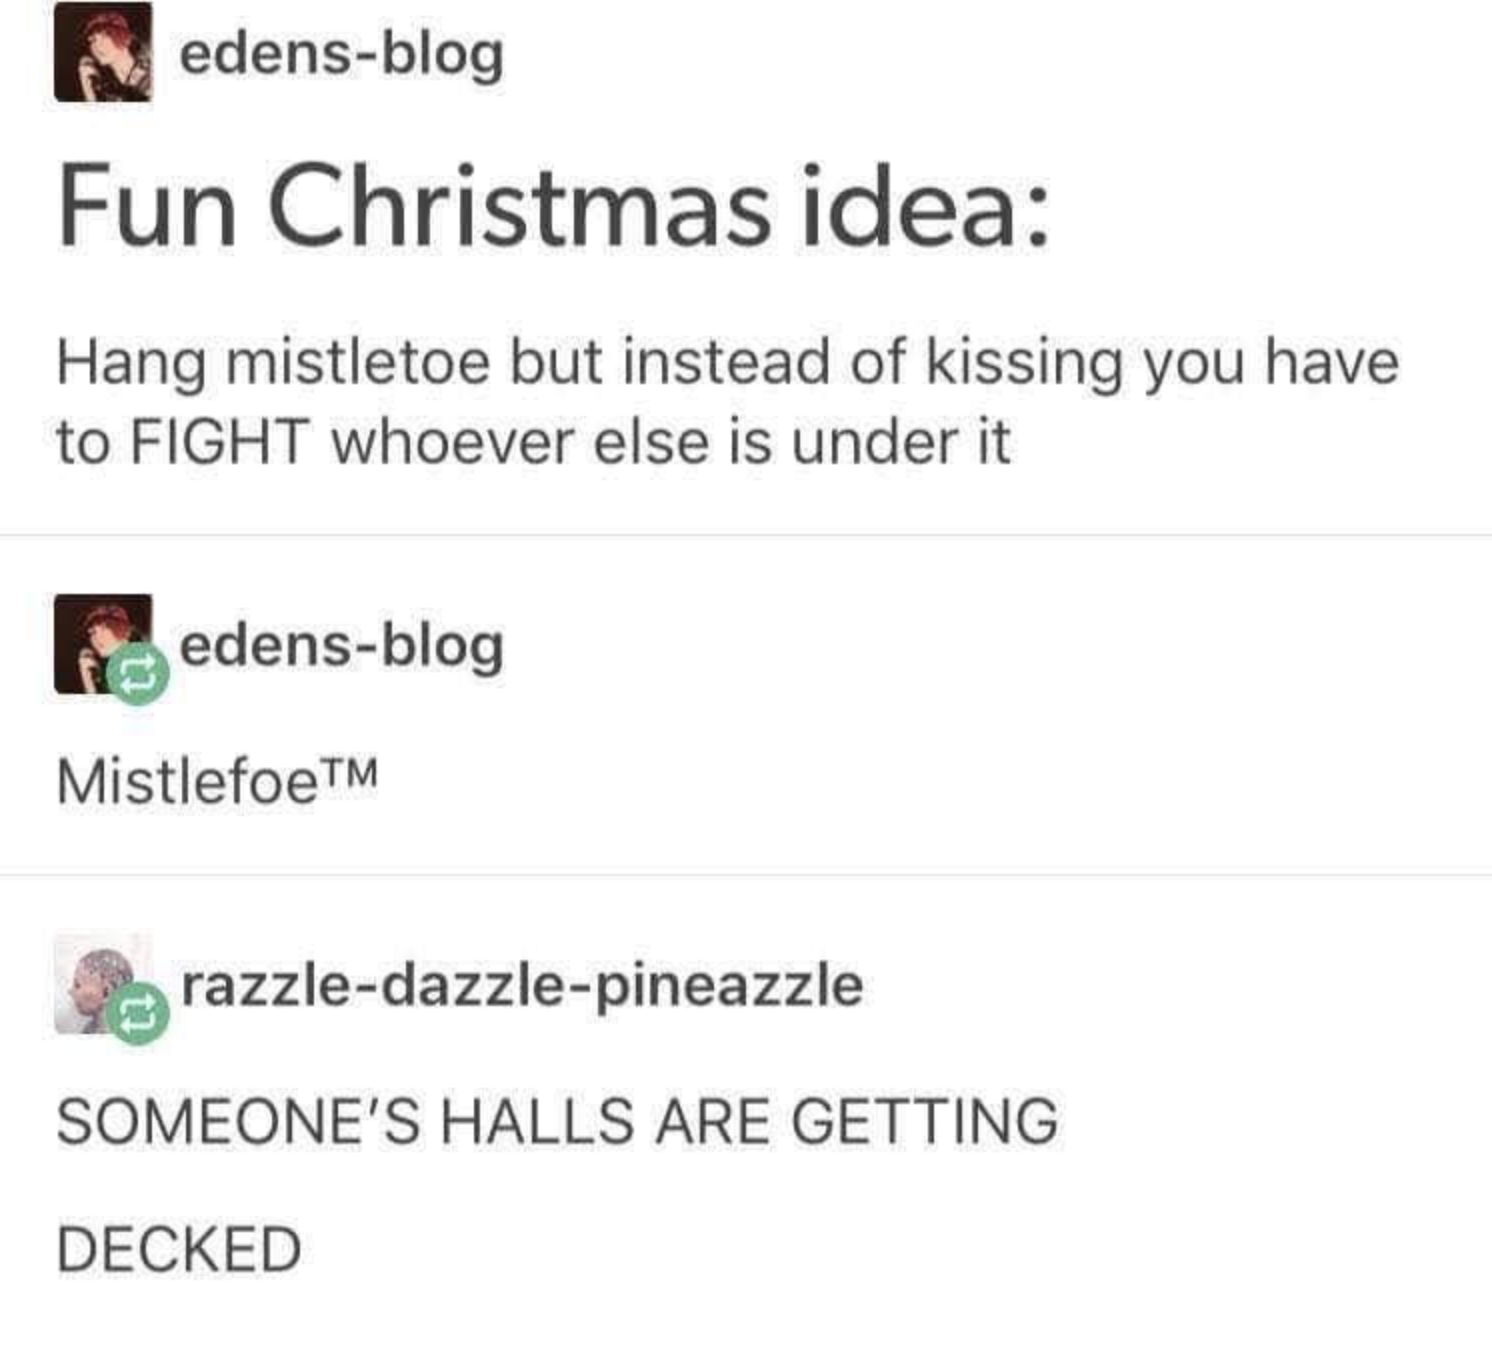 diagram - edensblog Fun Christmas idea Hang mistletoe but instead of kissing you have to Fight whoever else is under it edensblog MistlefoeTM razzledazzlepineazzle Someone'S Halls Are Getting Decked